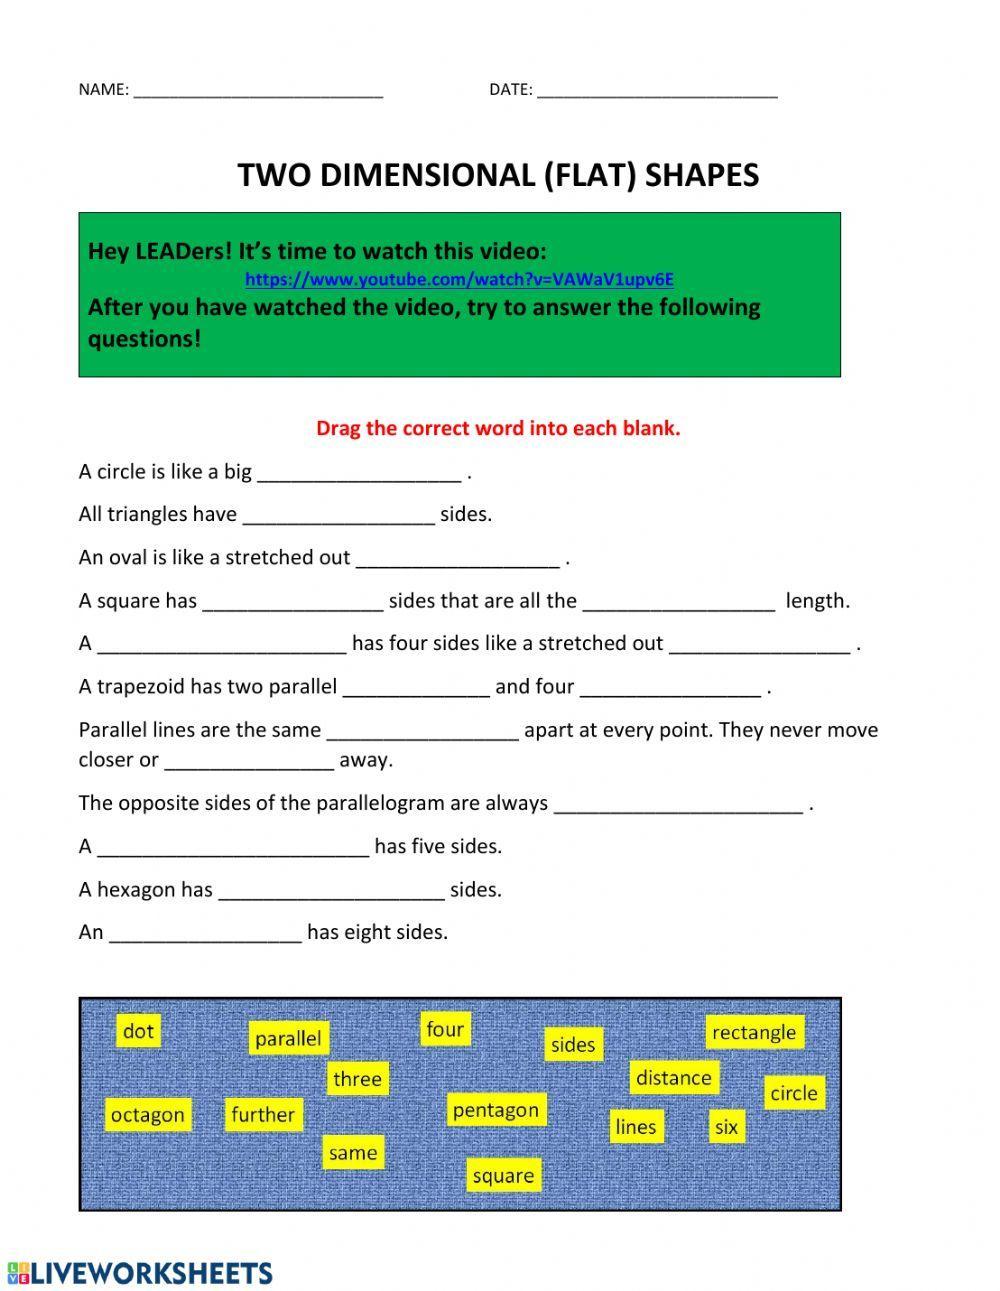 Two dimensional (flat) shapes